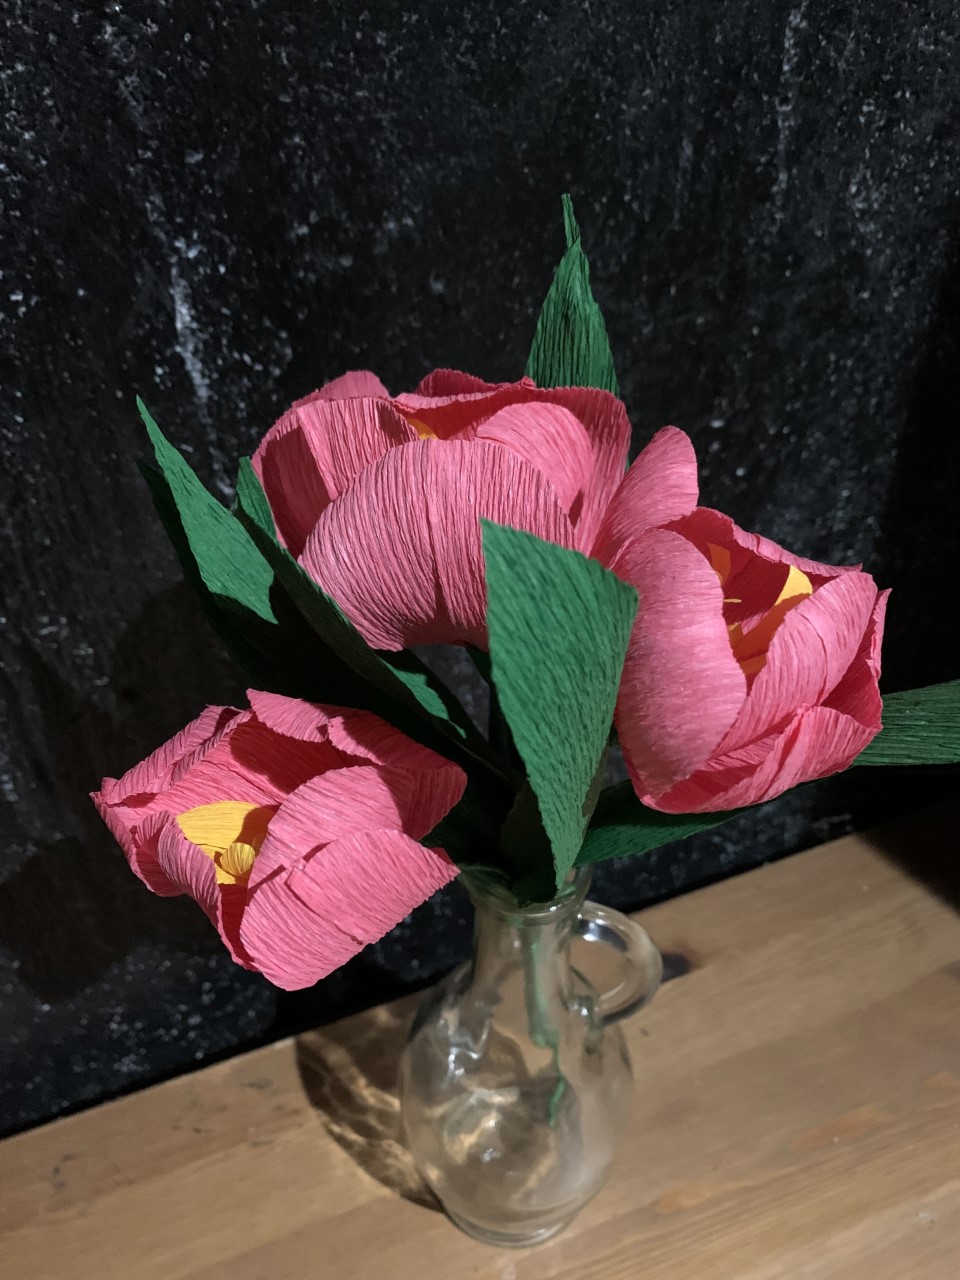 Image of pink tulips with green stems and leaves made from Crepe Paper in a vase.